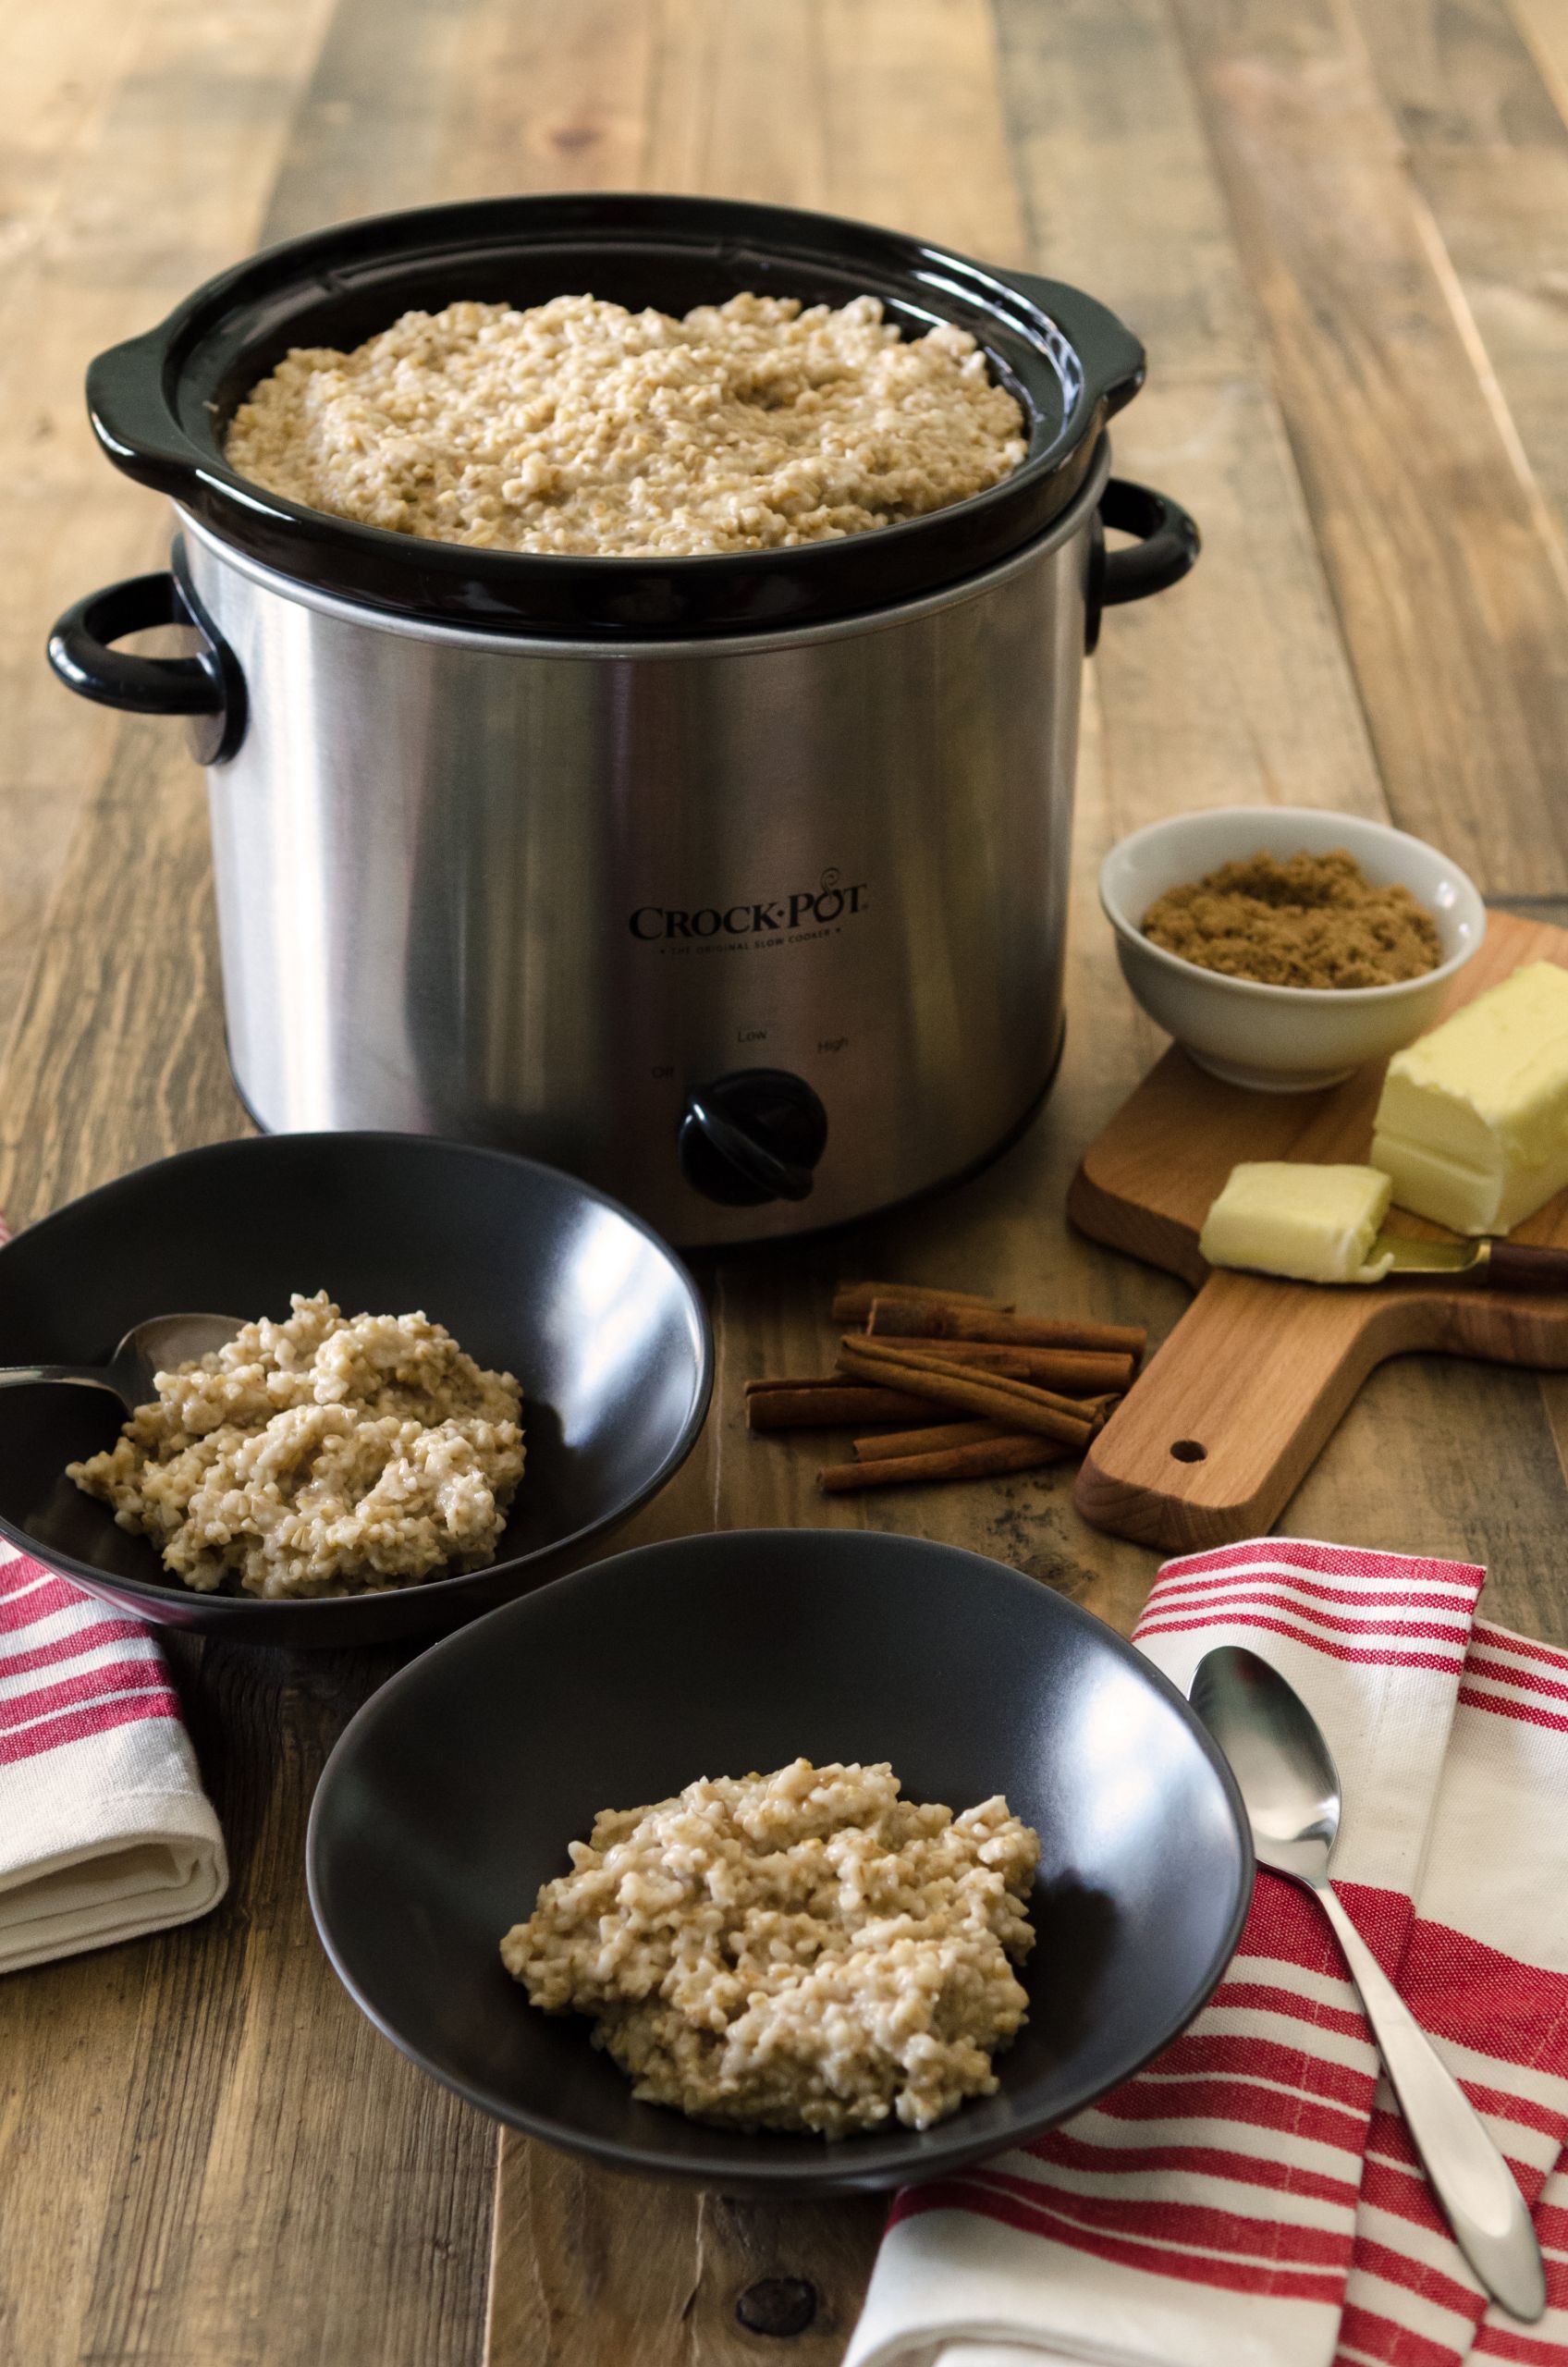 Steel Cut Oats Slow Cooker Recipes
 How to Make Steel Cut Oats in the Slow Cooker